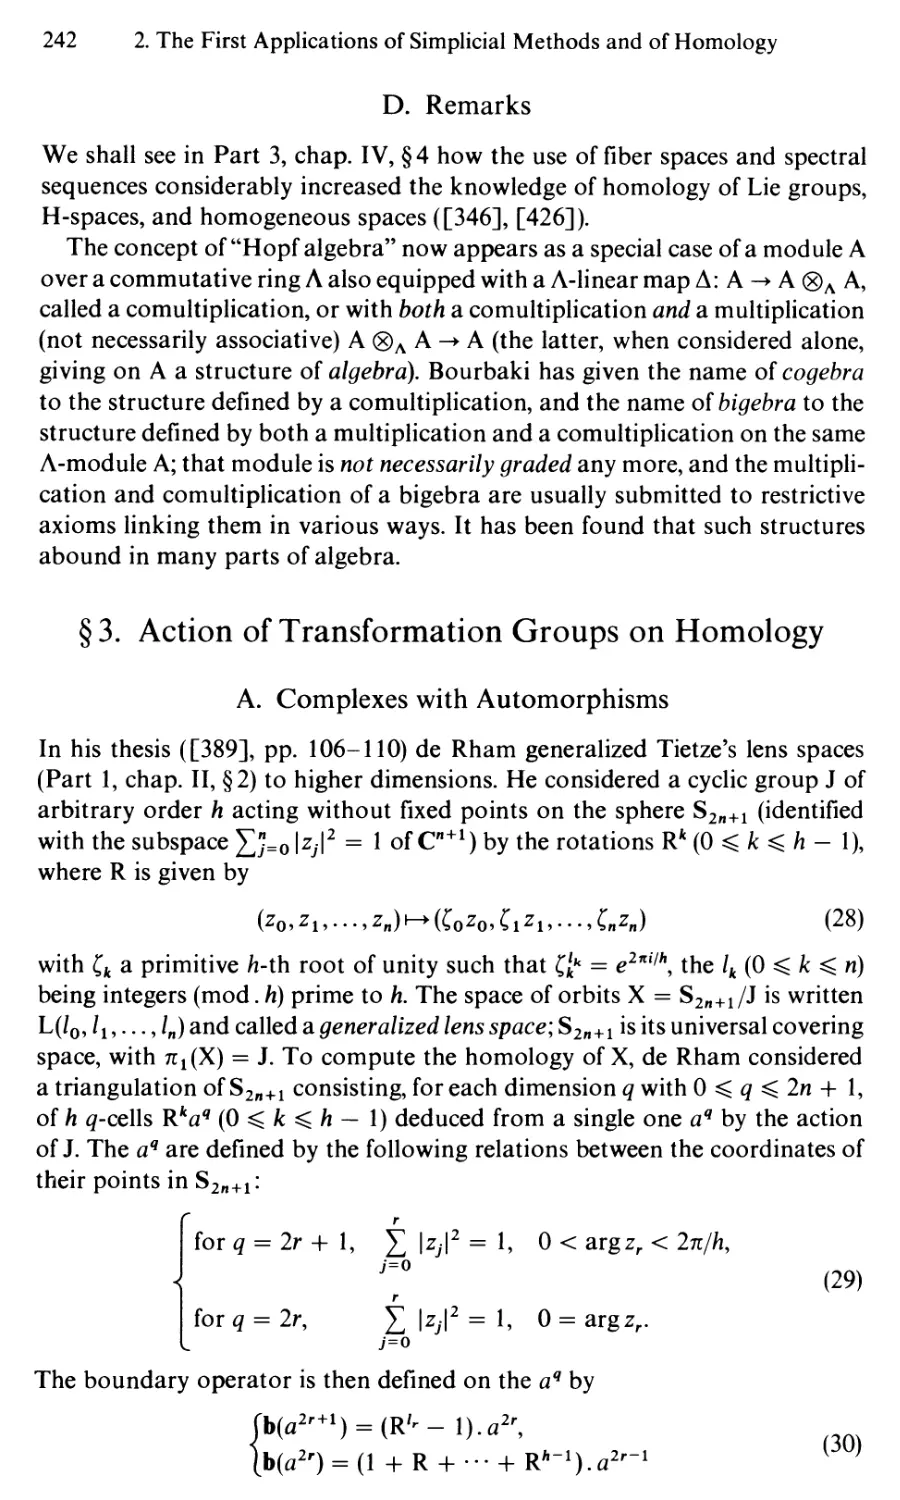 D. Remarks
§3. Action of Transformation Groups on Homology